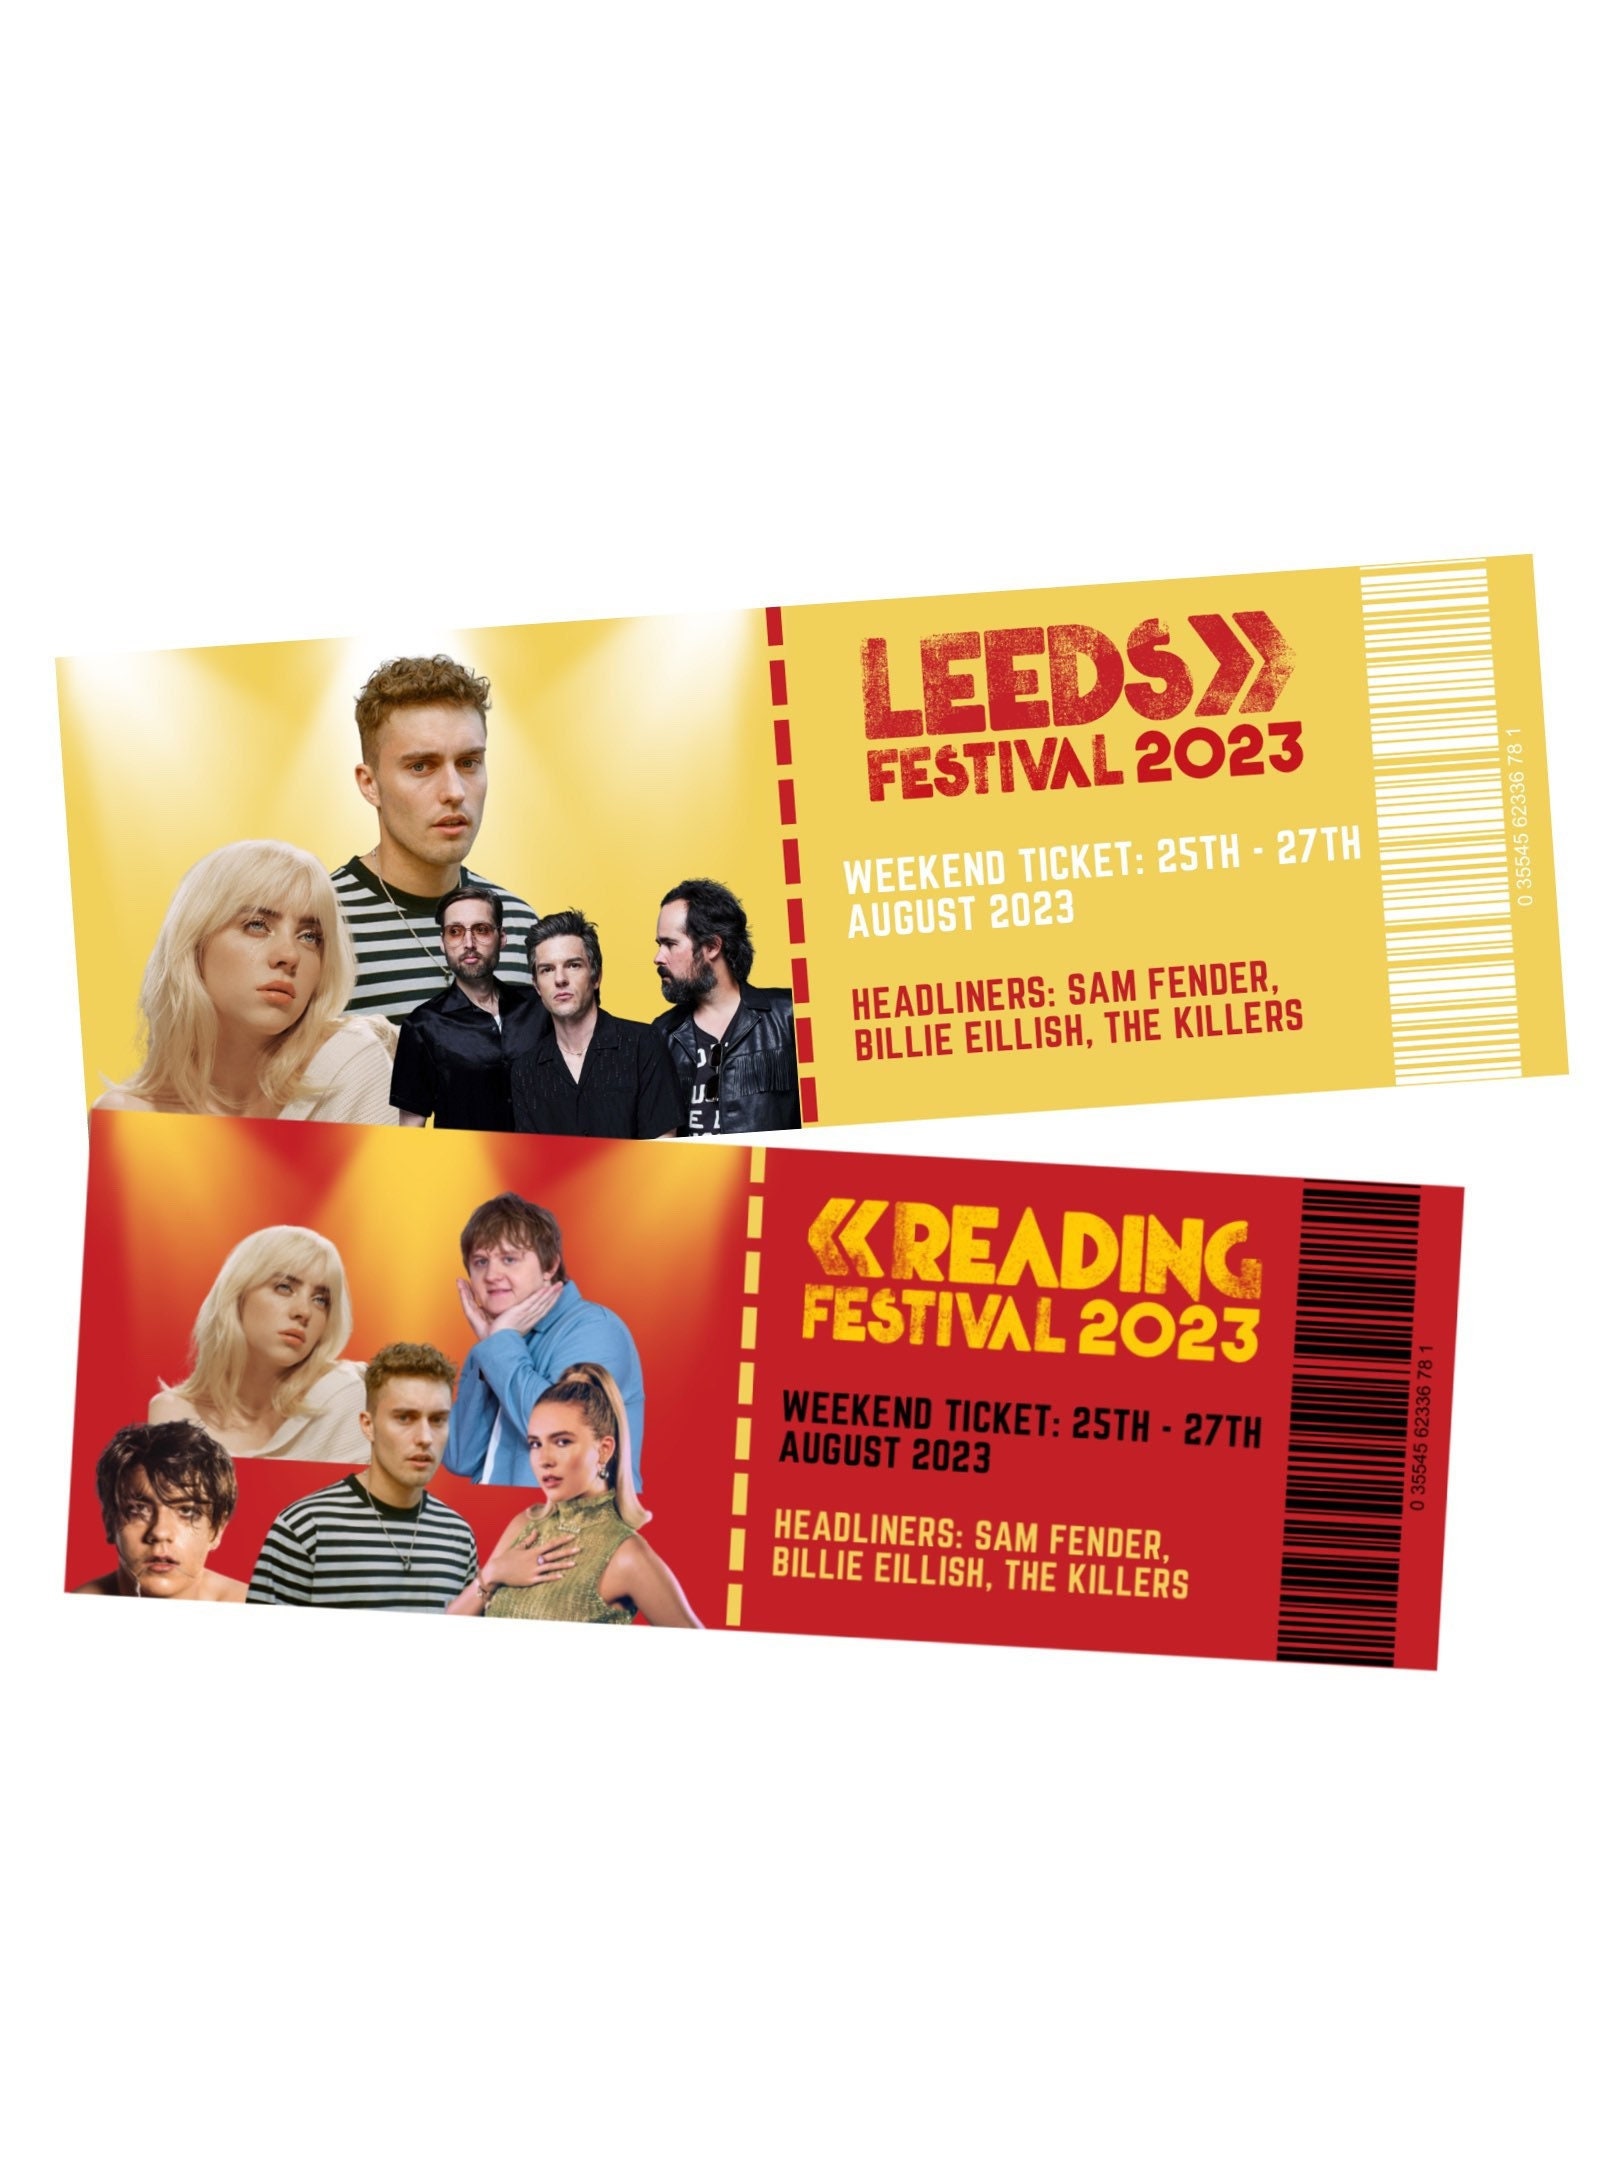 Leeds Festival 2023 headliners, available tickets and how to get